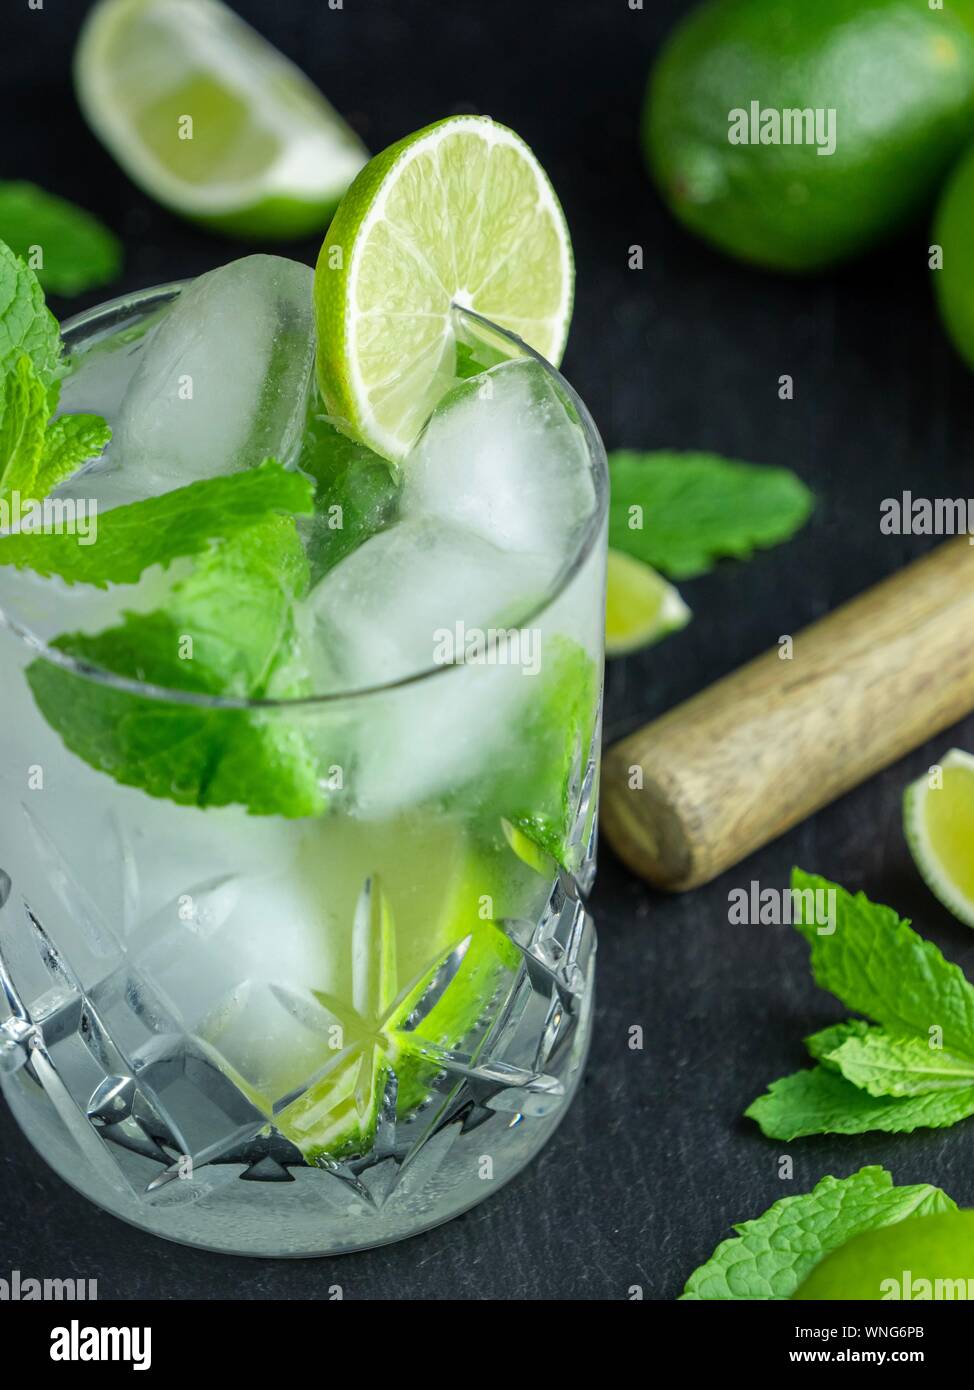 A mojito cocktail made from fresh mint and lime in a cut glass tumbler against a black slate background Stock Photo